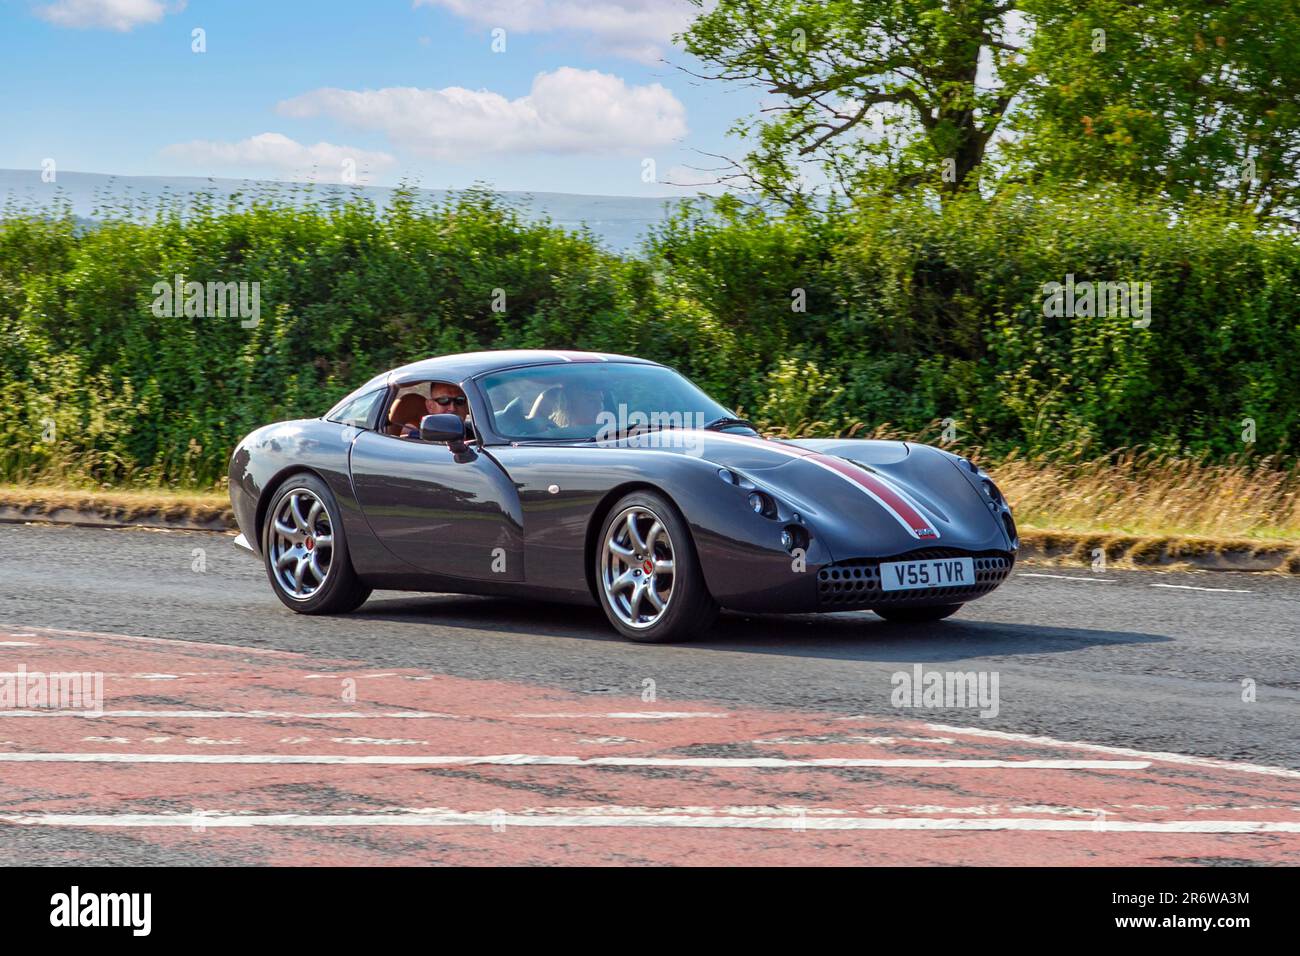 A TVR Tuscan Grey Car Roadster Petrol at the Classic & Performance Motor Show at Hoghton Tower Stock Photo